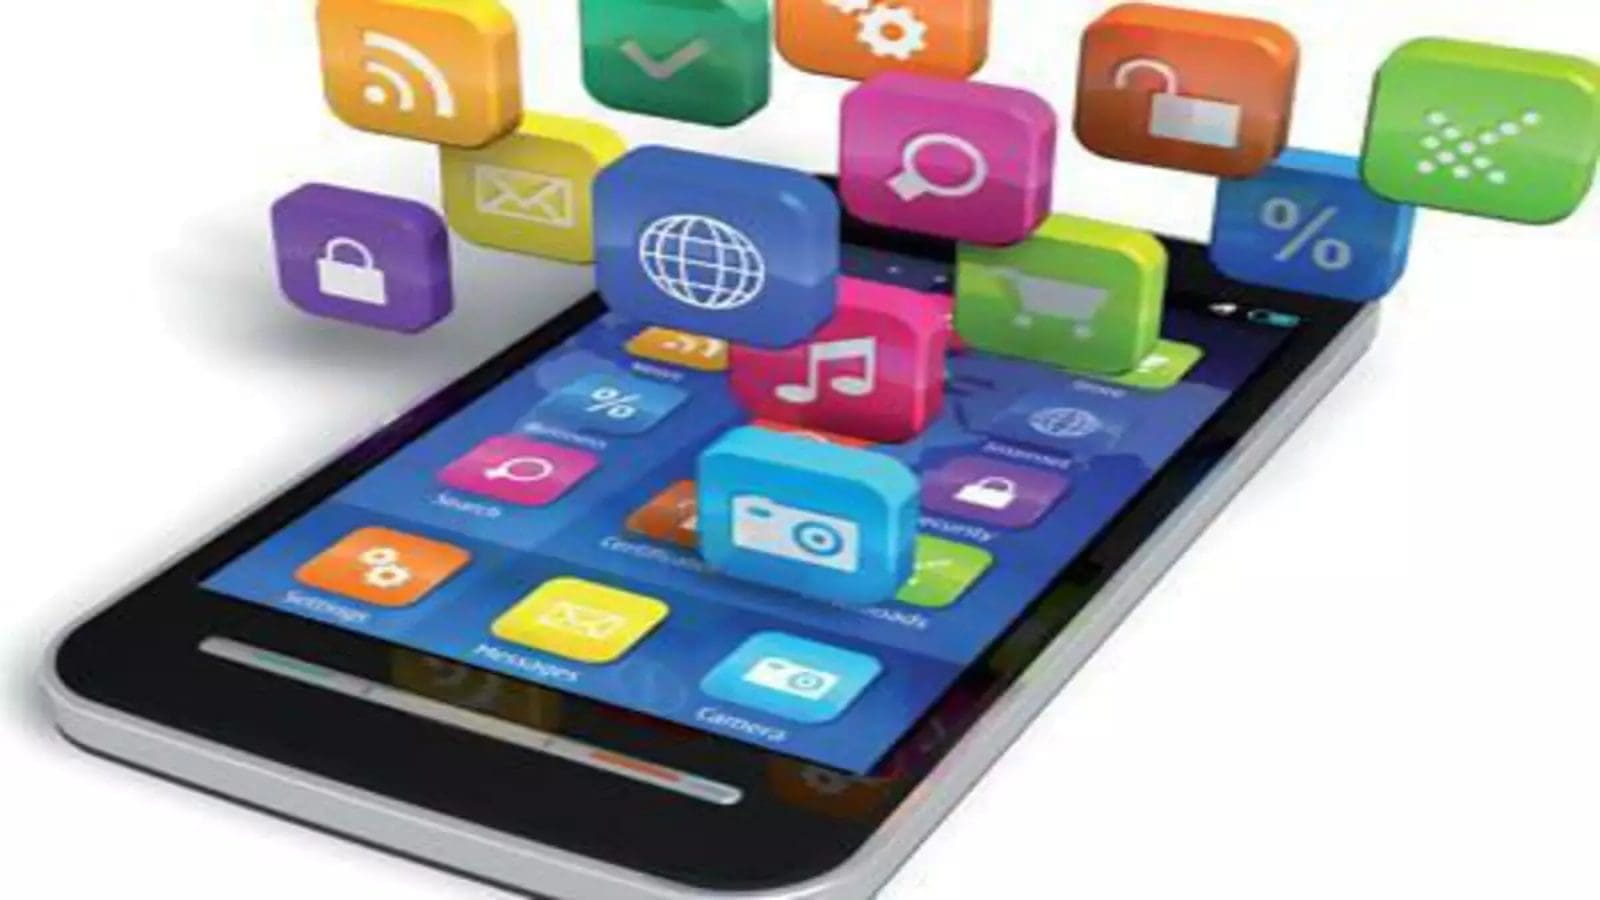 FSSAI launches mobile app to ease MSMEs registration process